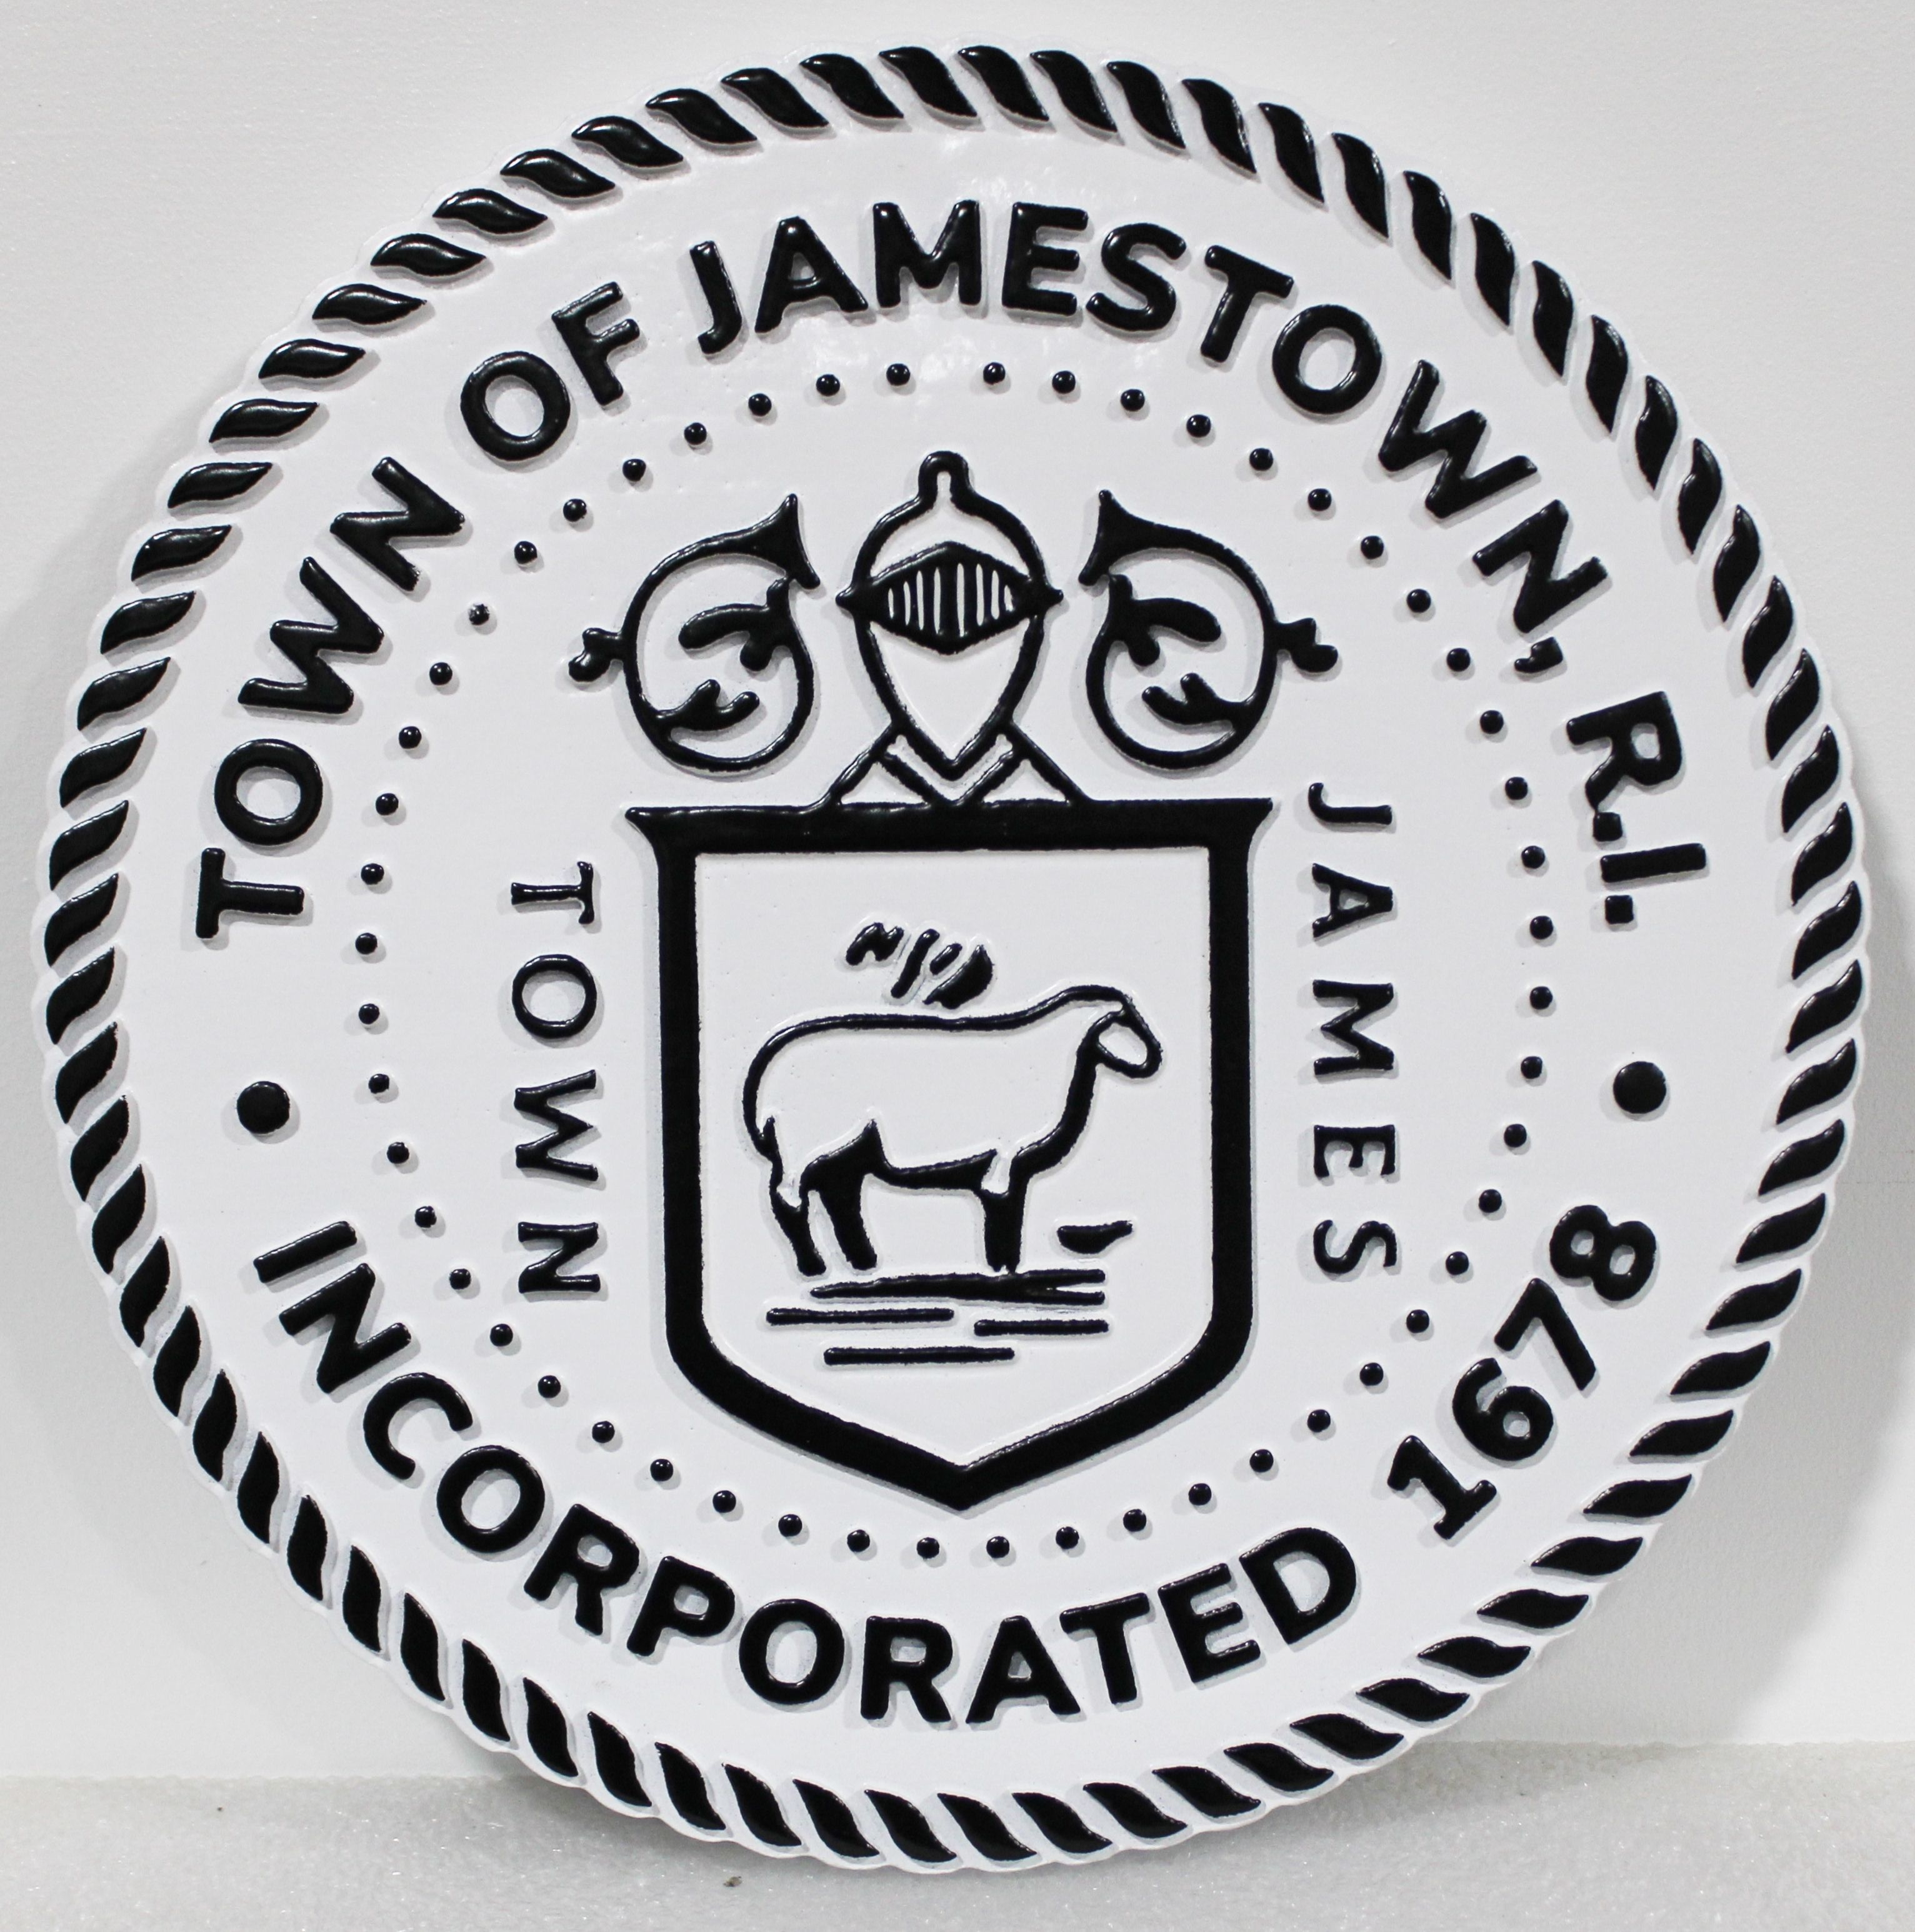 DP-1577 - Carved HDU Plaque of the Seal of the Town of Jamestown, Rhode Island